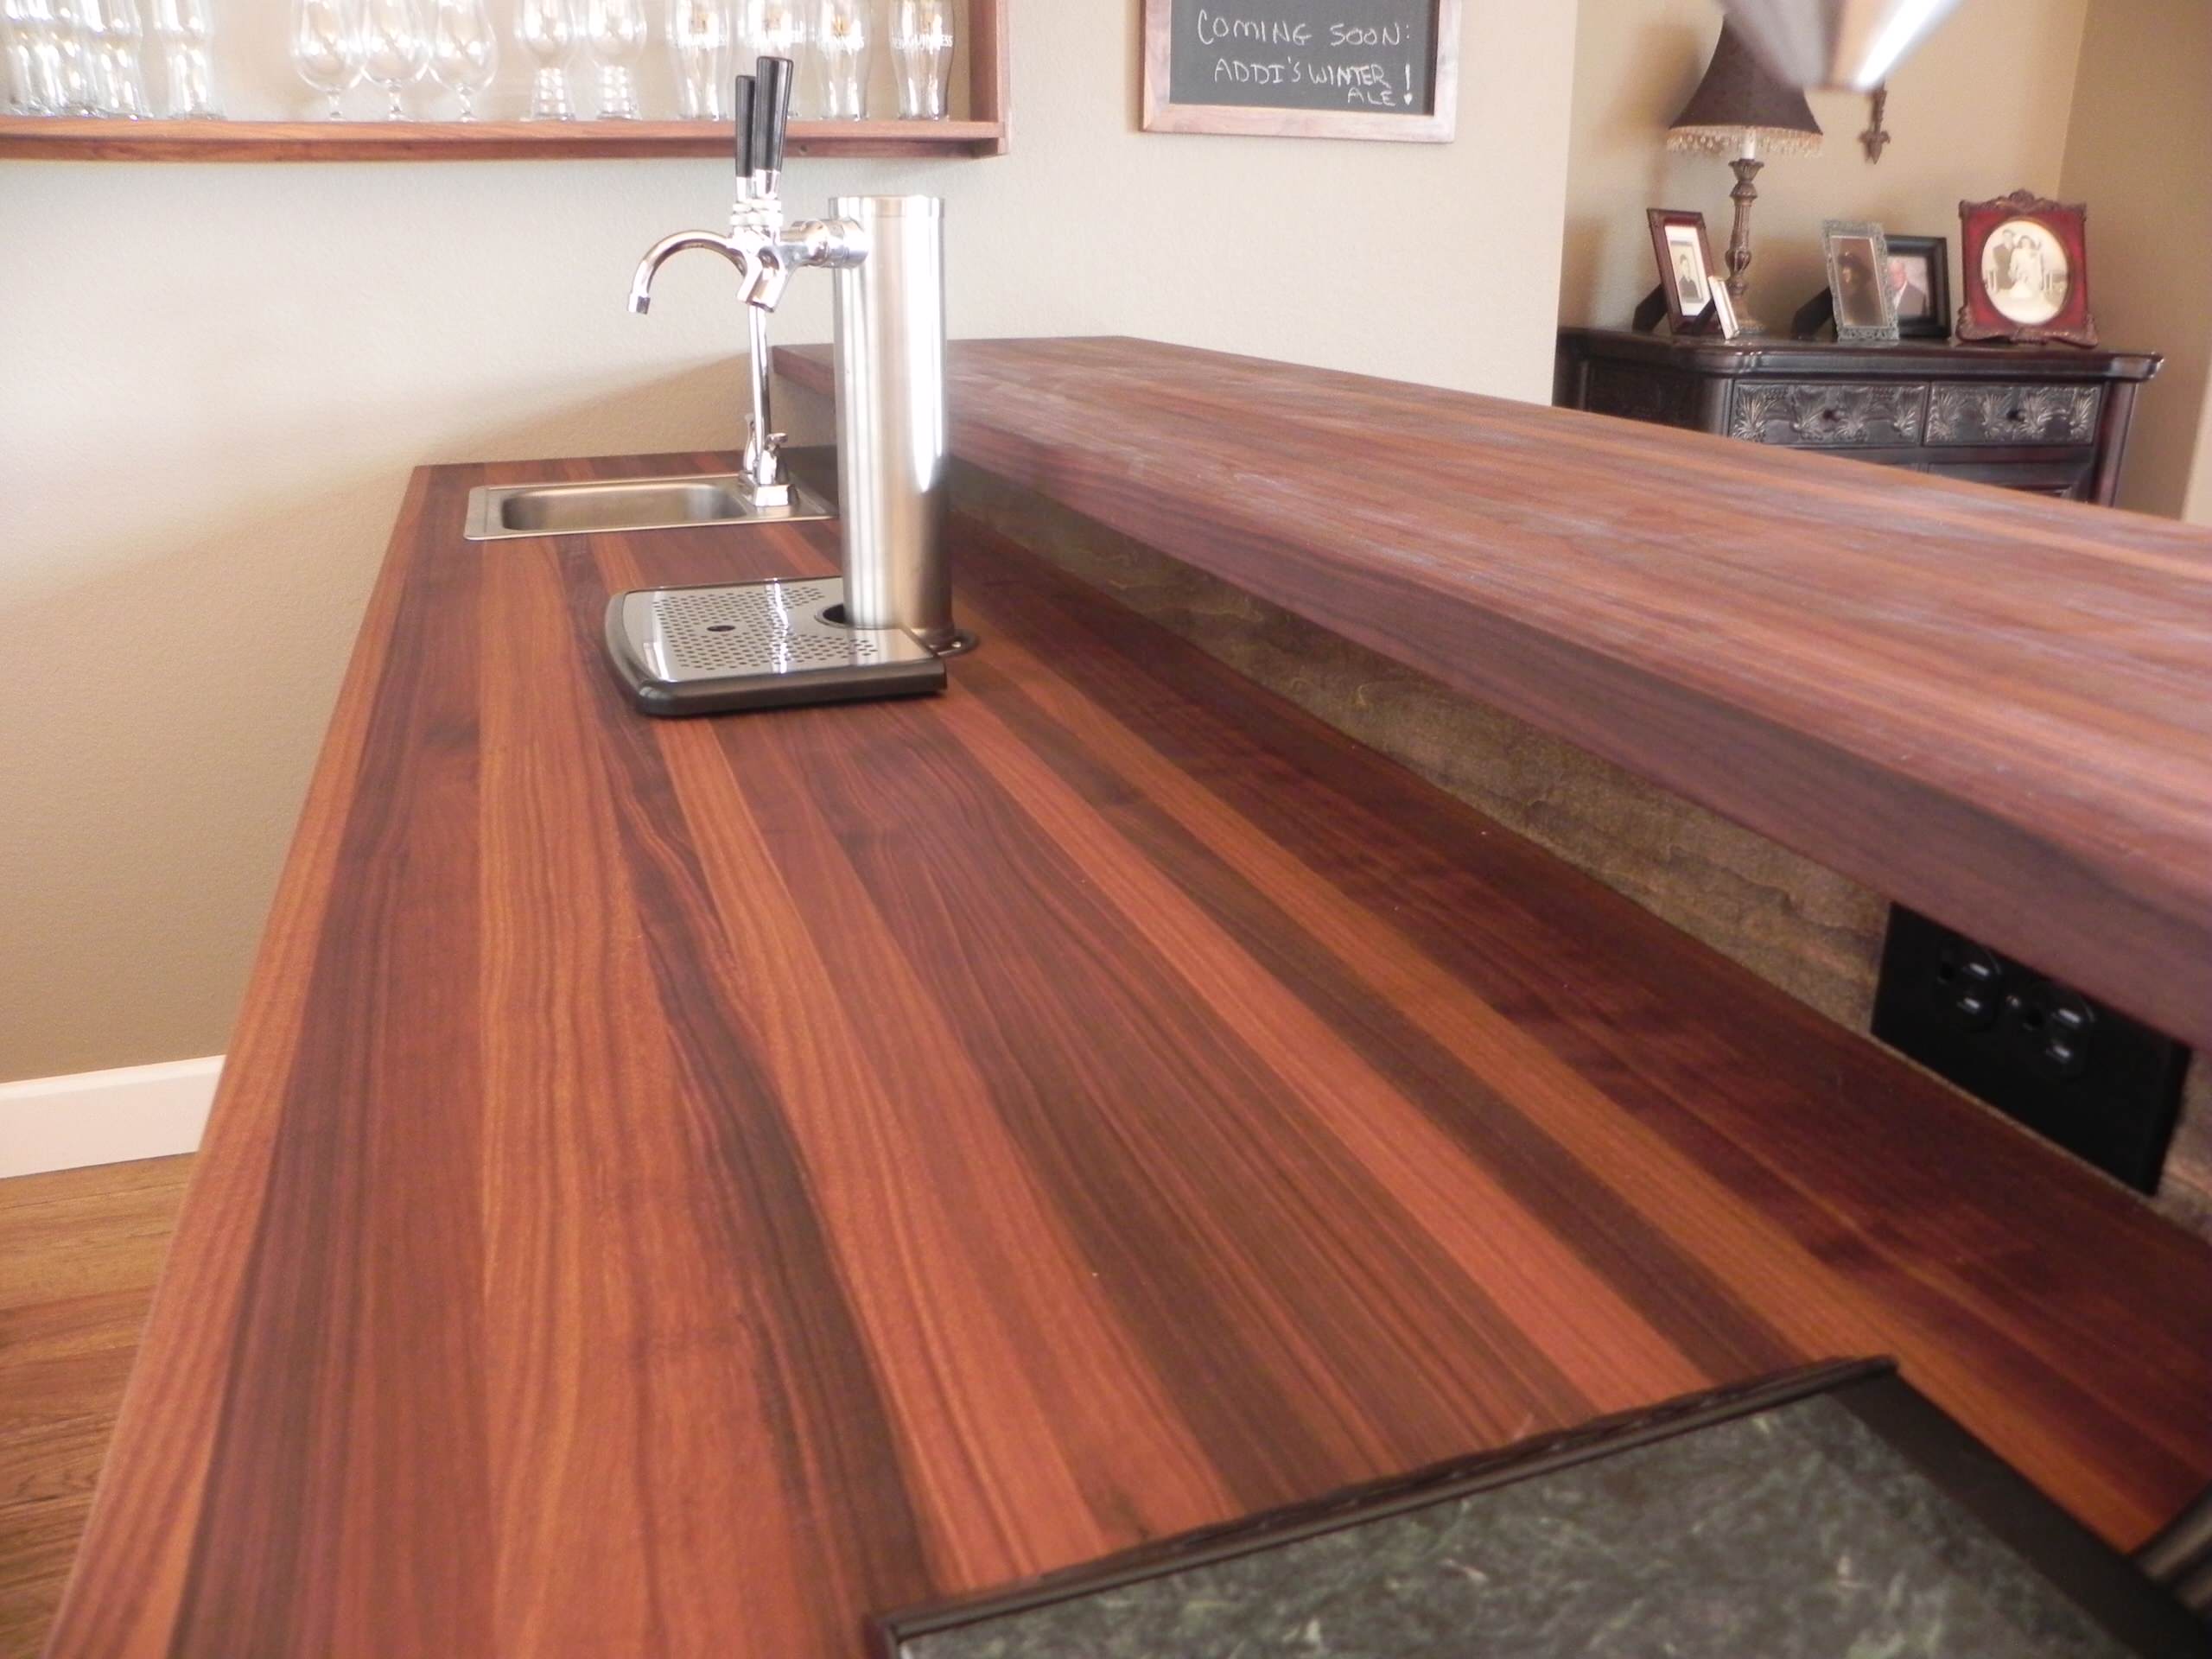 All About Wood Countertops This Old House